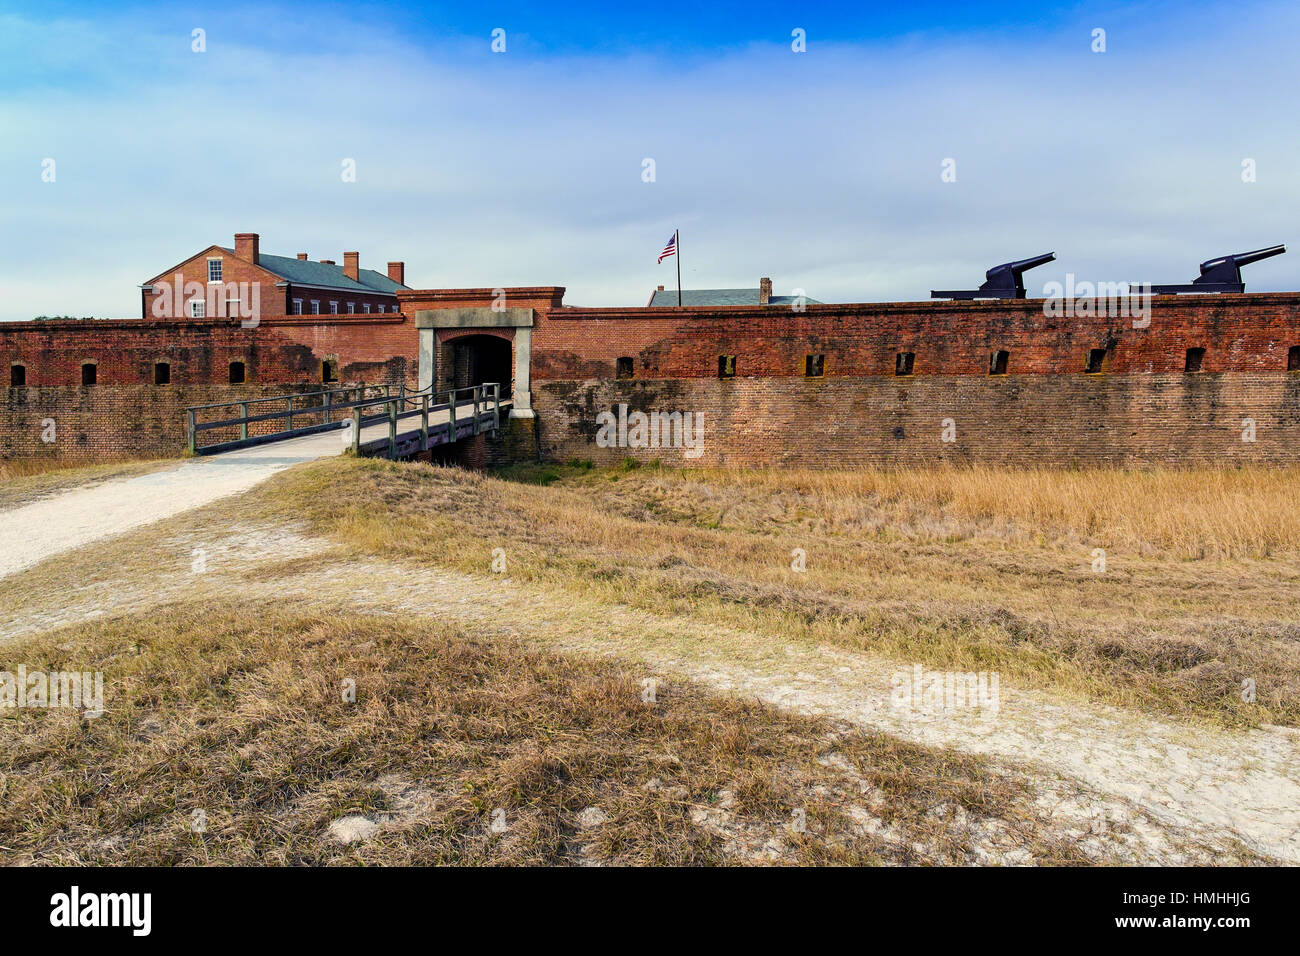 Entrance Gate and Walls of a Brick Fort, Fort Clinch, Nassau County, Florida Stock Photo